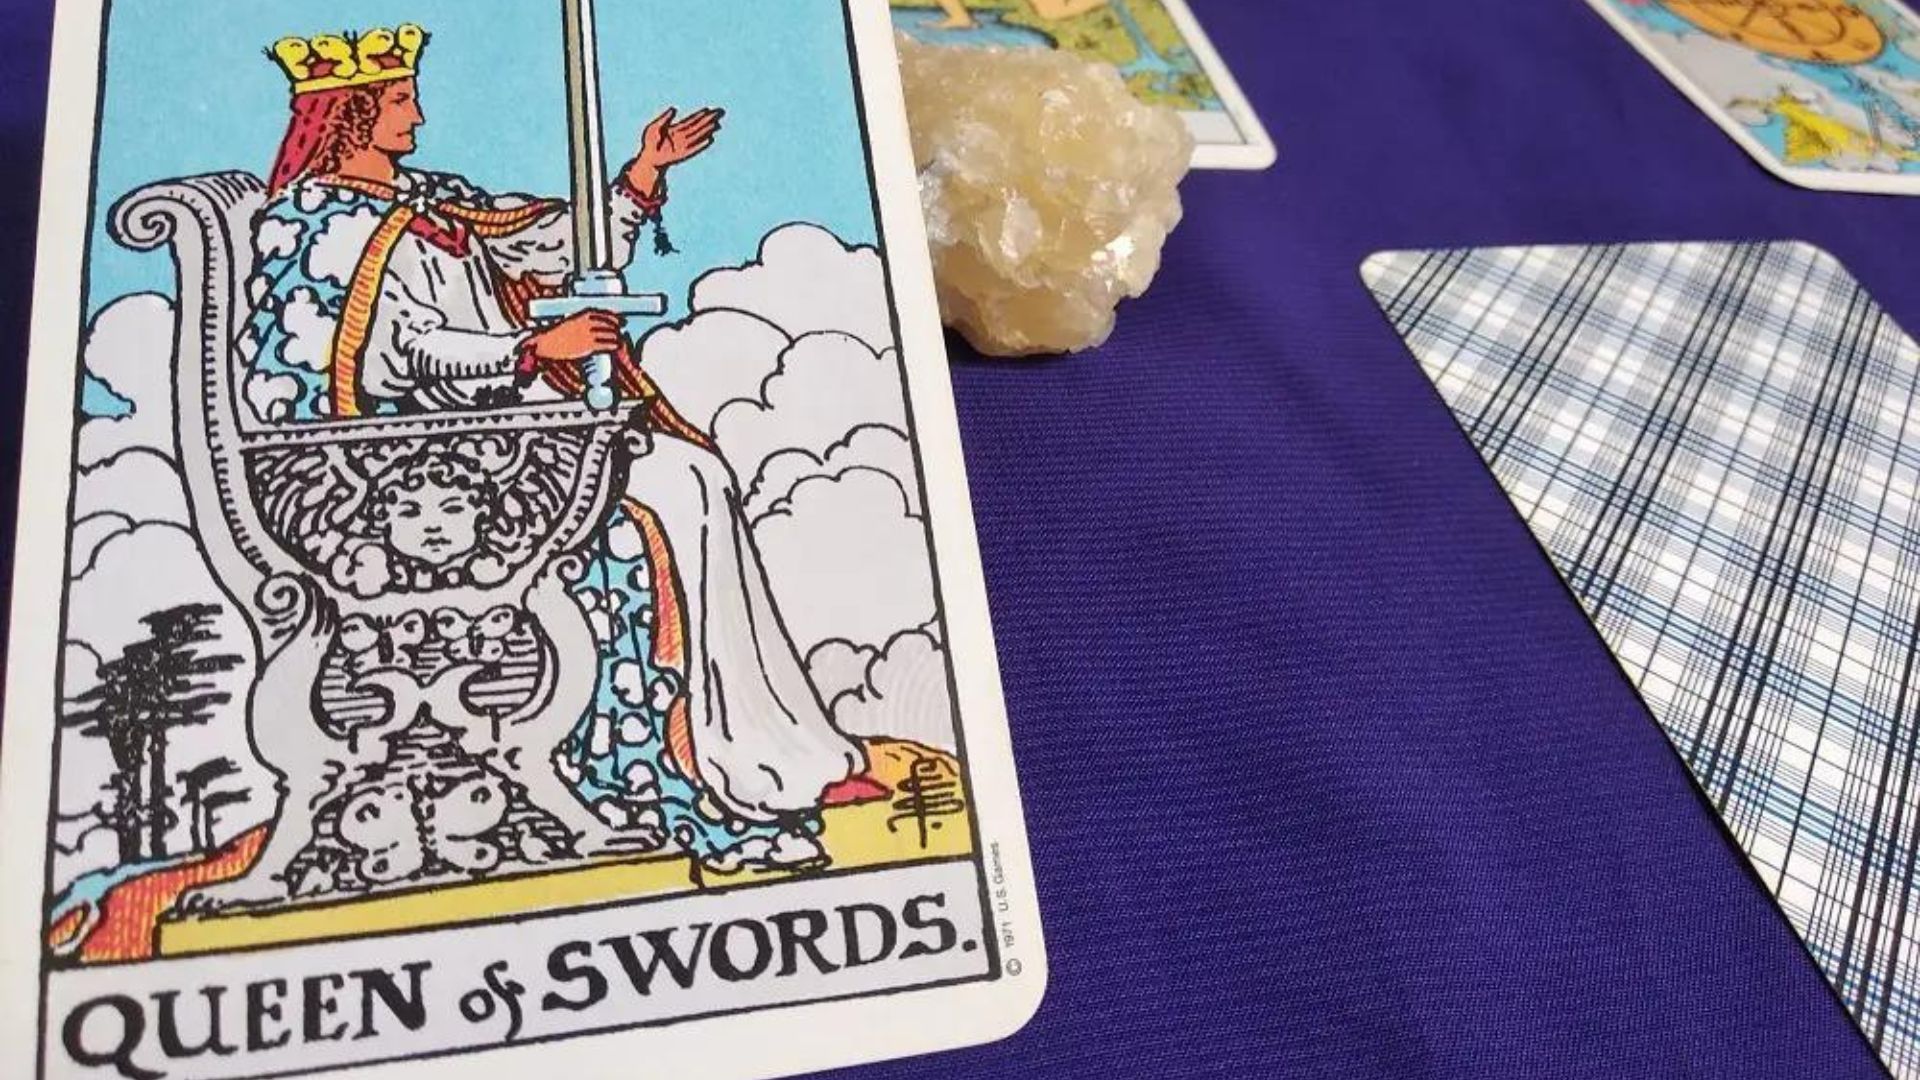 Queen Of Swords Card With Other Cards on A Table